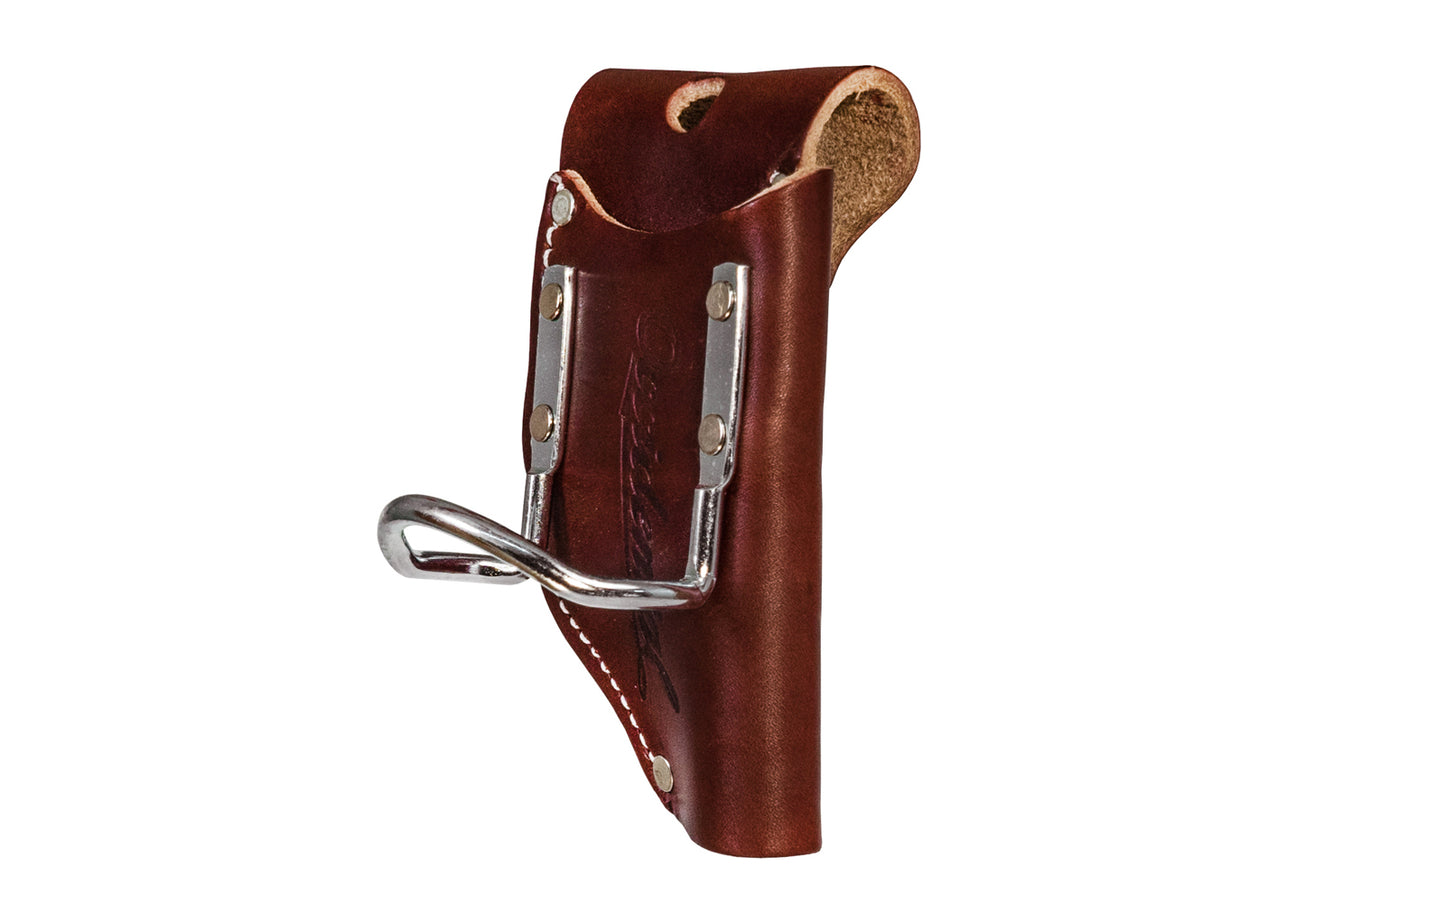 Occidental Leather 2-in-1 Tool & Hammer Holder Holster ~ 5020 - Made in USA ~ Made of Sturdy English Bridle Leather - 3" Projection - Twice the capacity in belt space of one item - 2-in-1 Holder -  Holster